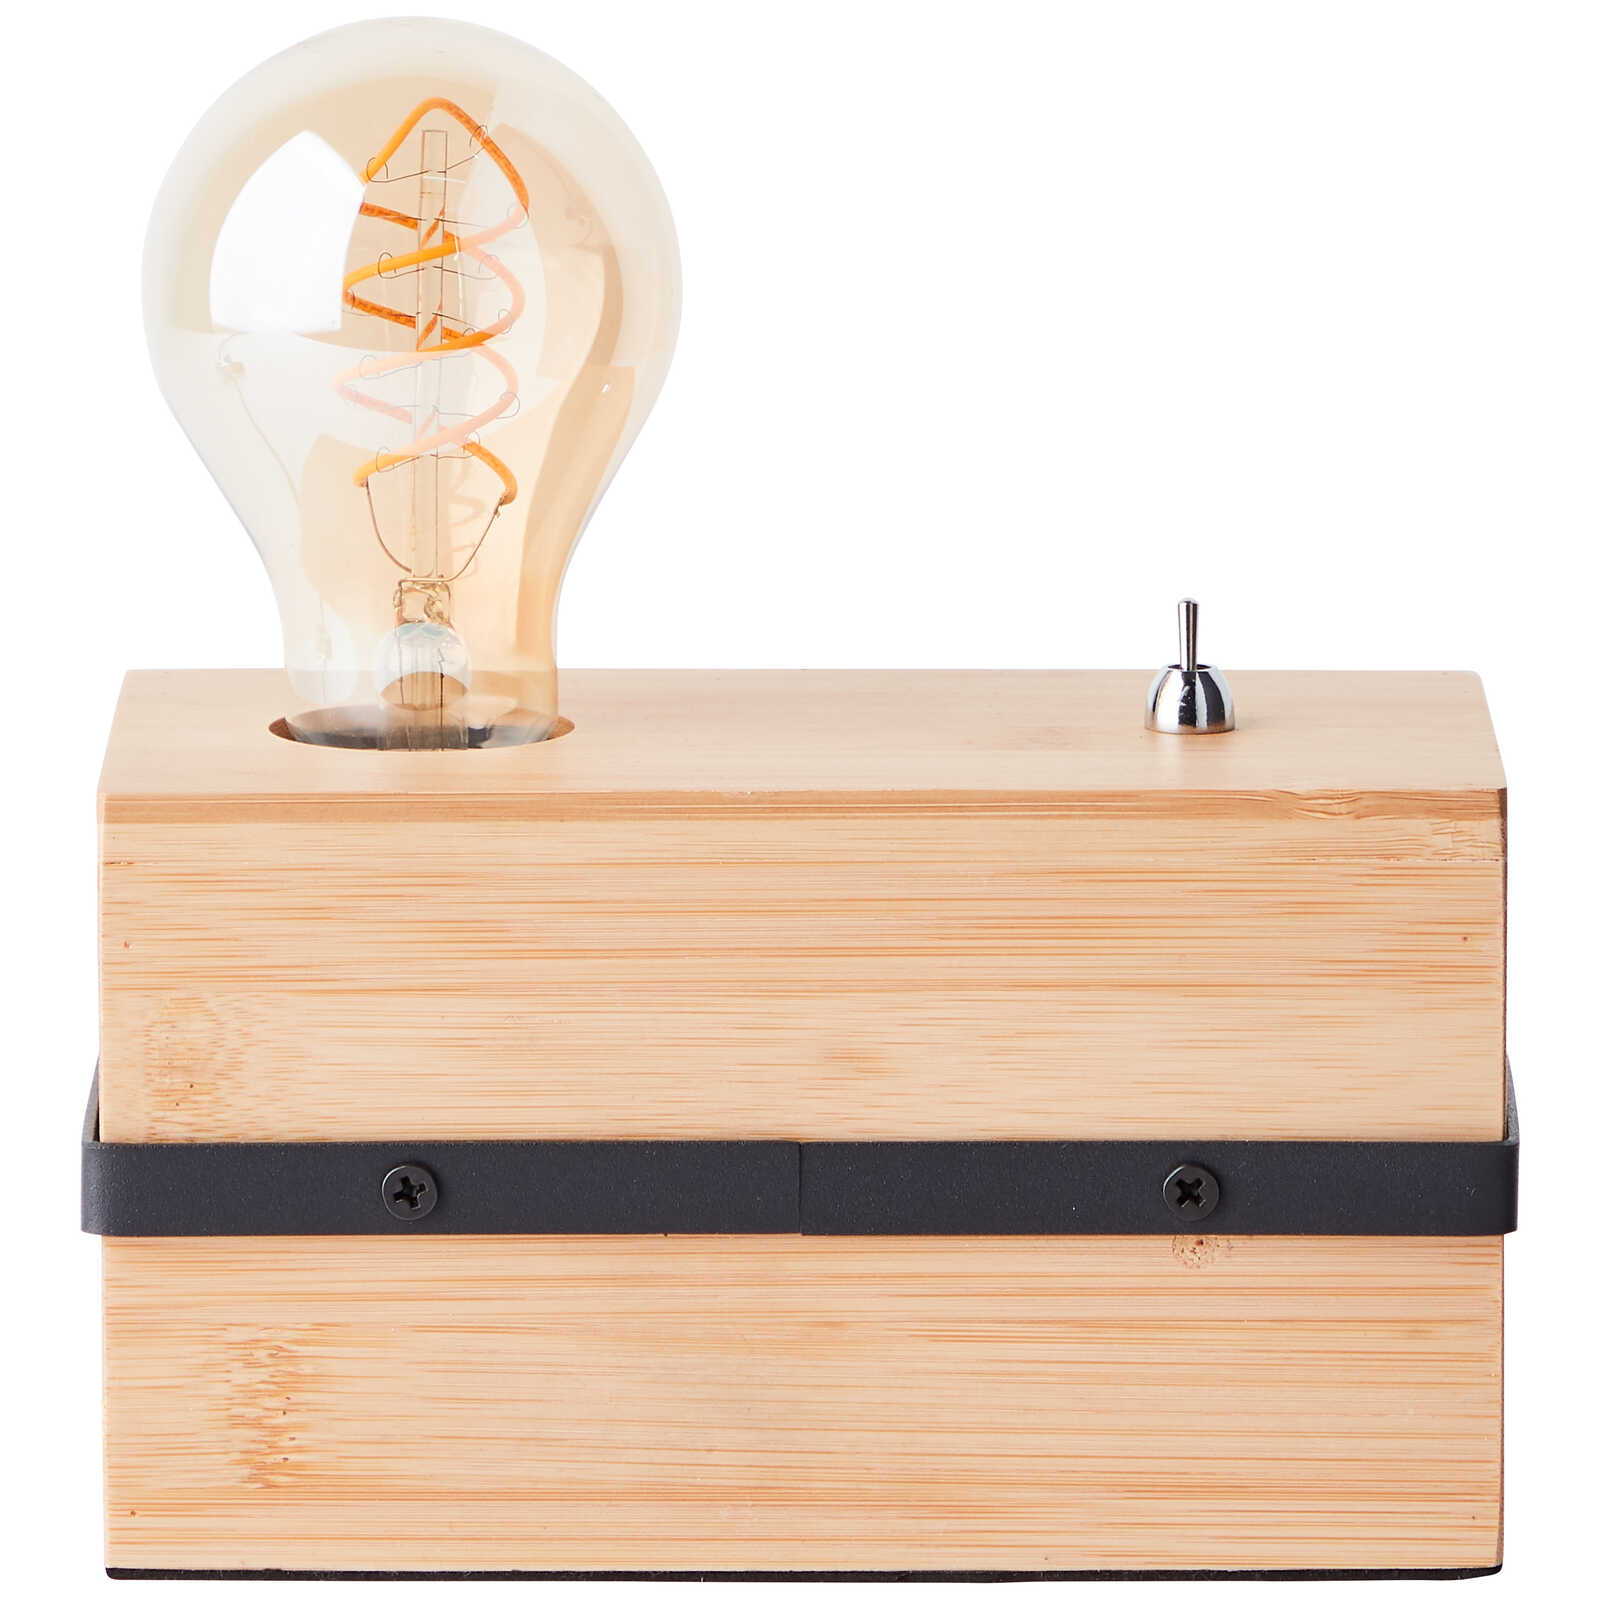             Wooden table lamp - Bea 1 - Brown
        